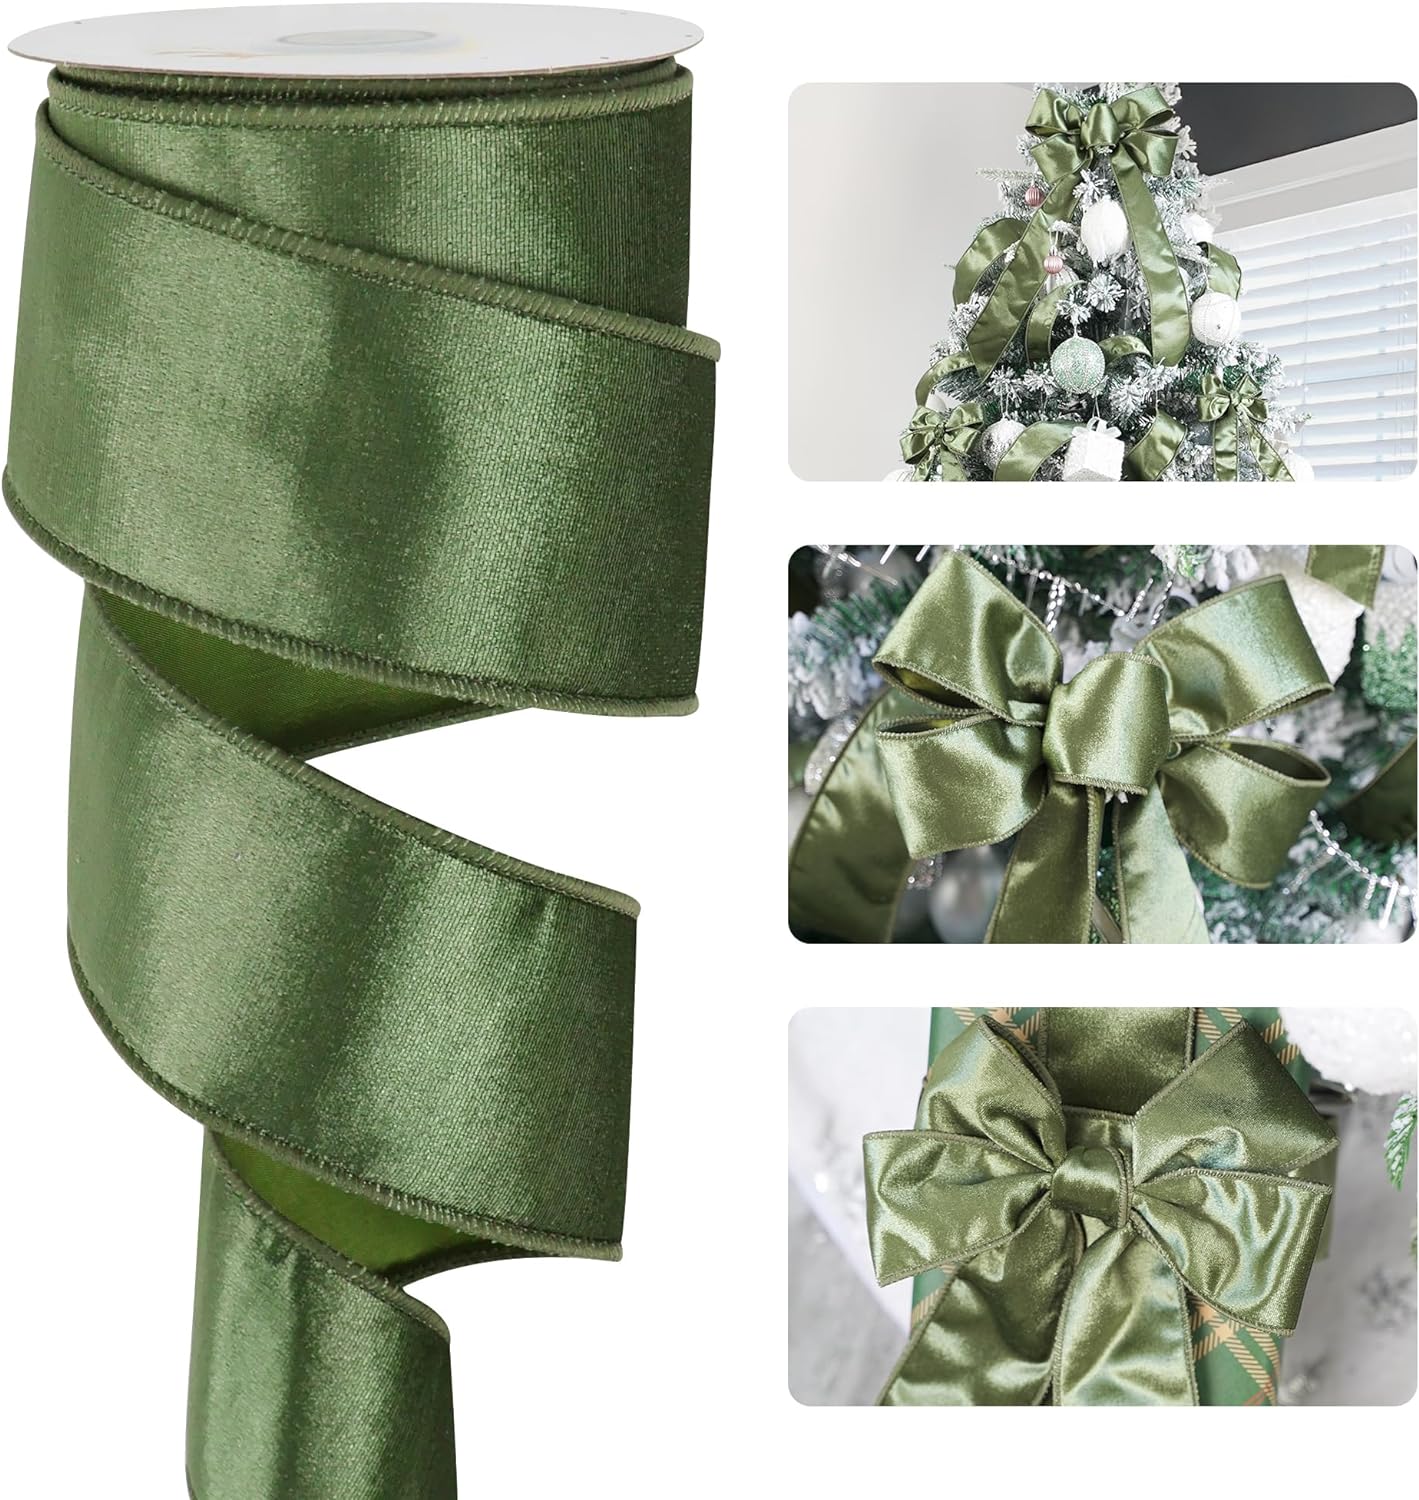 LEMO Green Velvet Ribbon Wired 2-12 inch for Christmas Tree, Large Bows, Wreaths, Gift Wrapping, Garland, Home Decor, Crafts-Continuous Roll